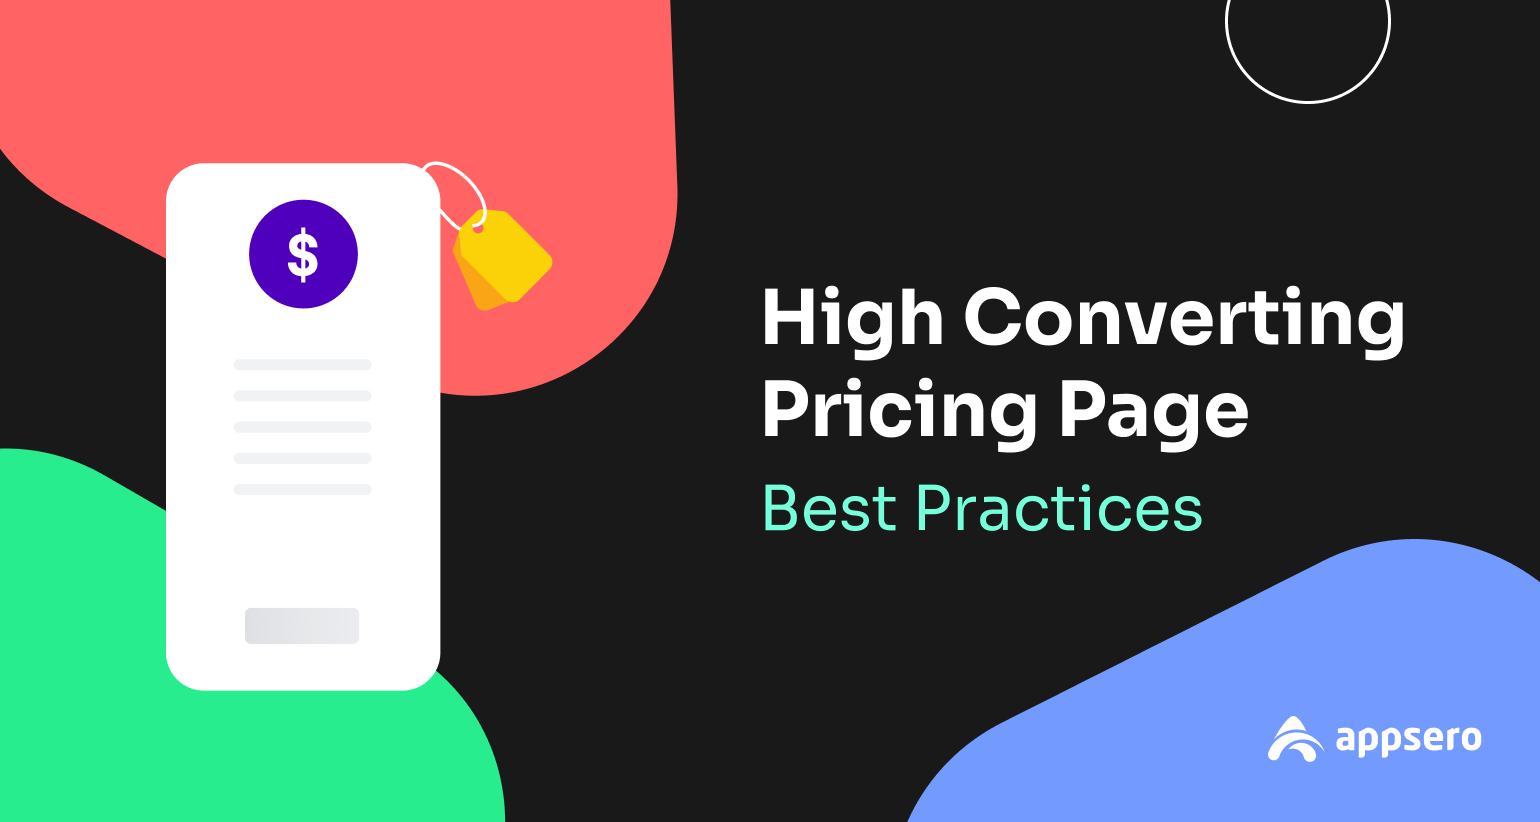 12 Factors and Tools to Consider While Preparing a ‘High Converting Pricing Page’